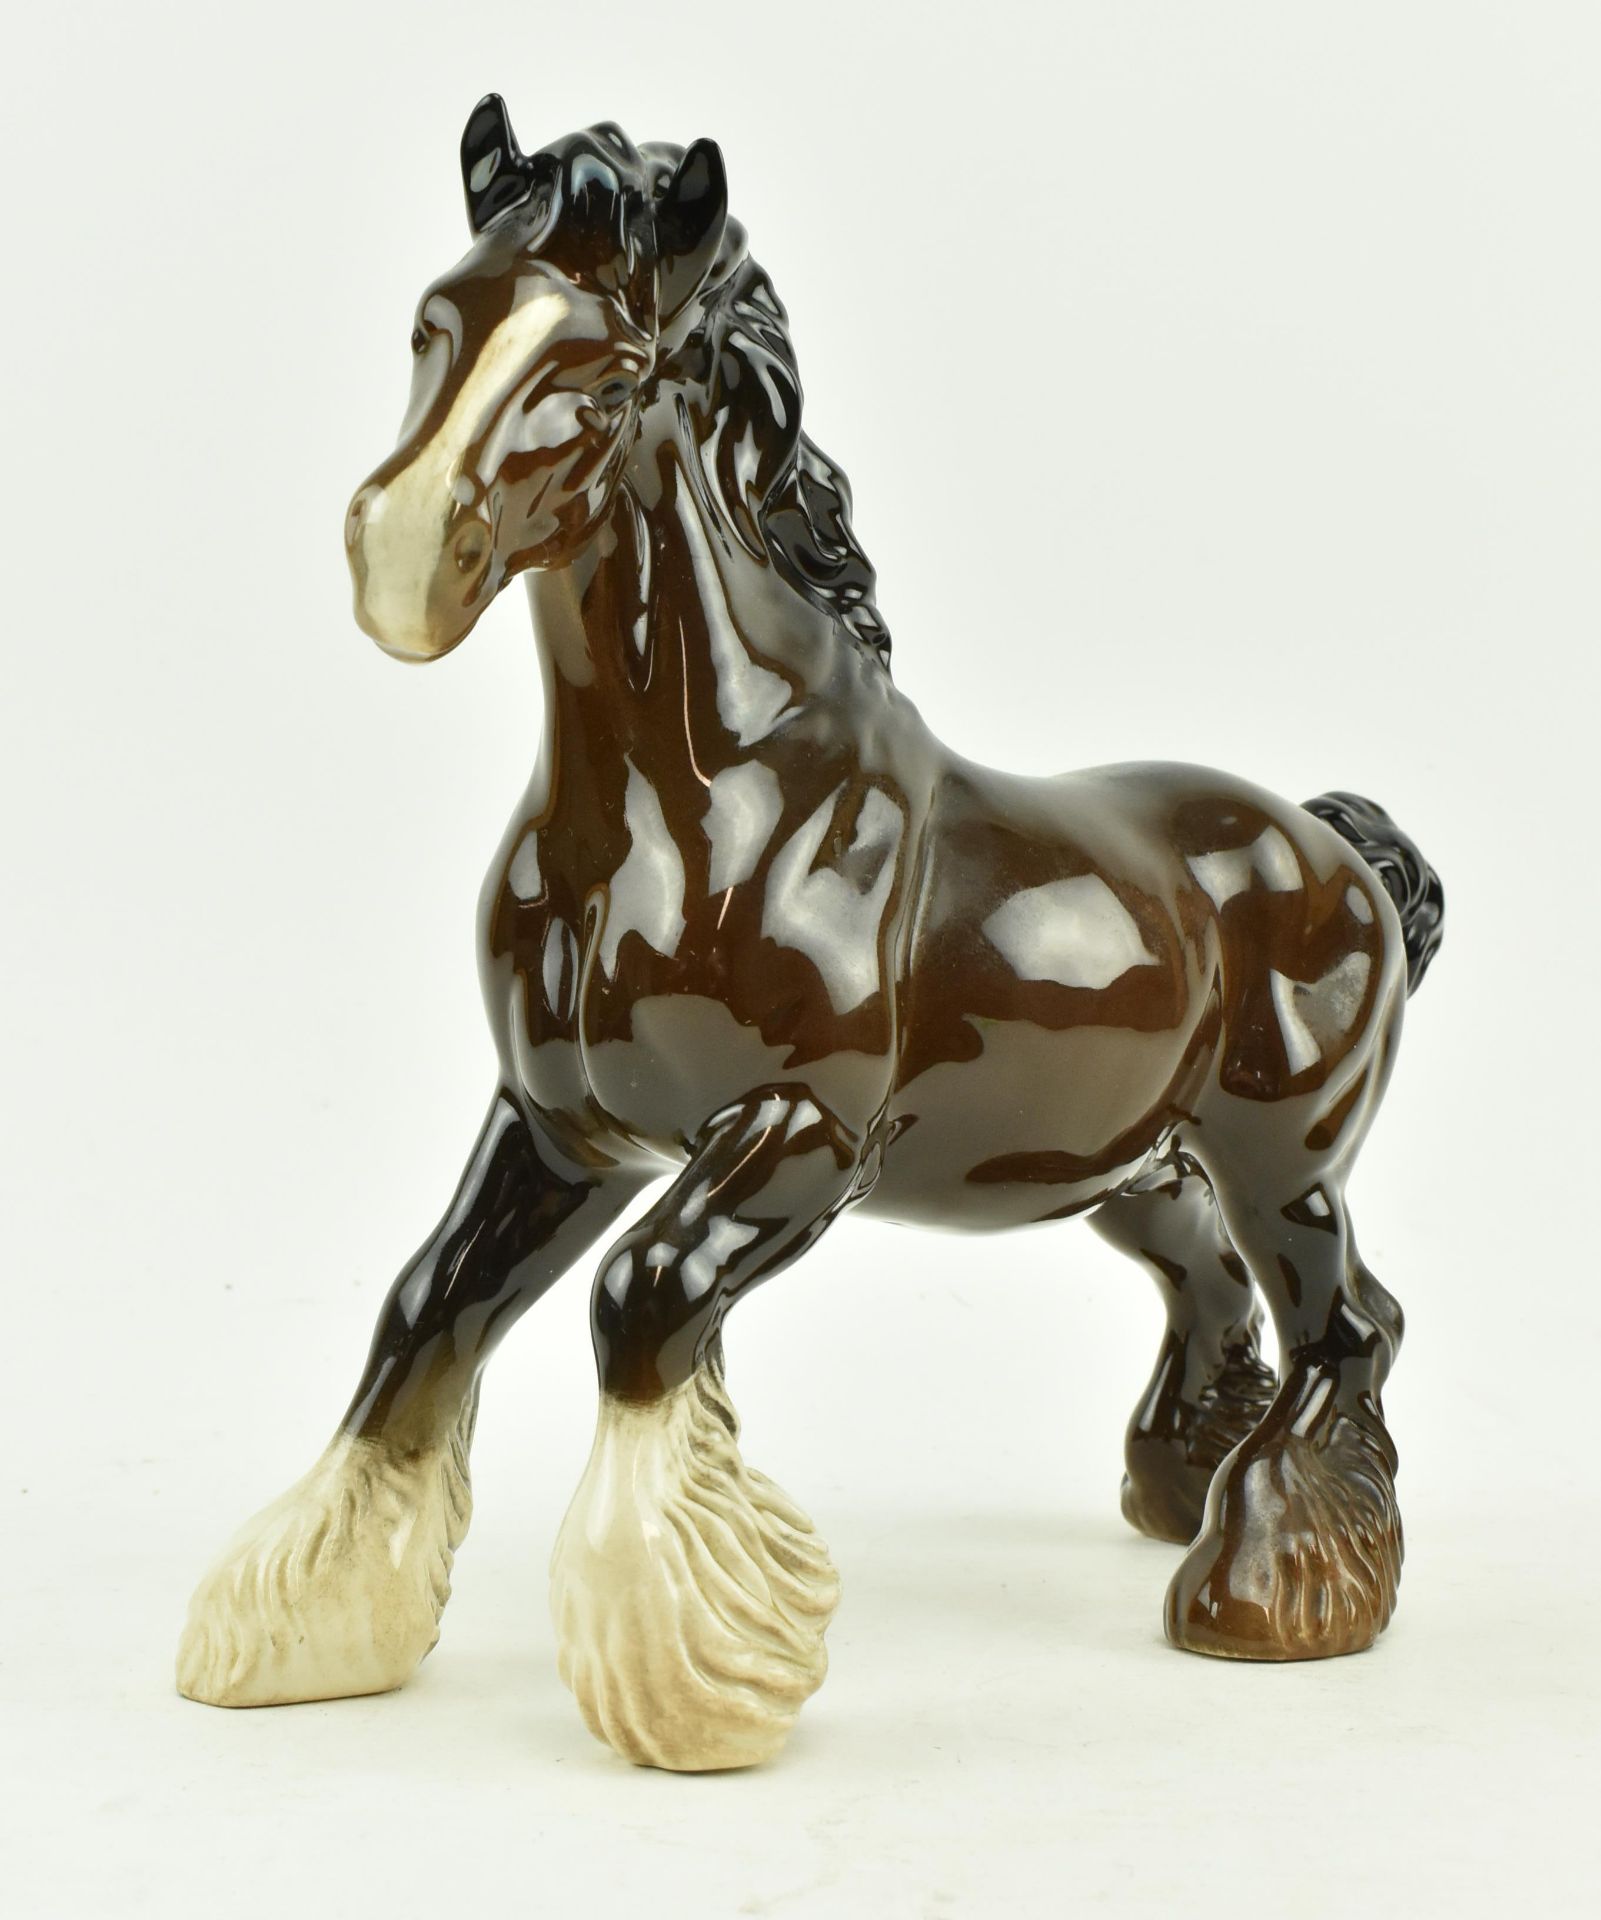 BESWICK - 20TH CENTURY PORCELAIN FIGURINE OF A SHIRE HORSE